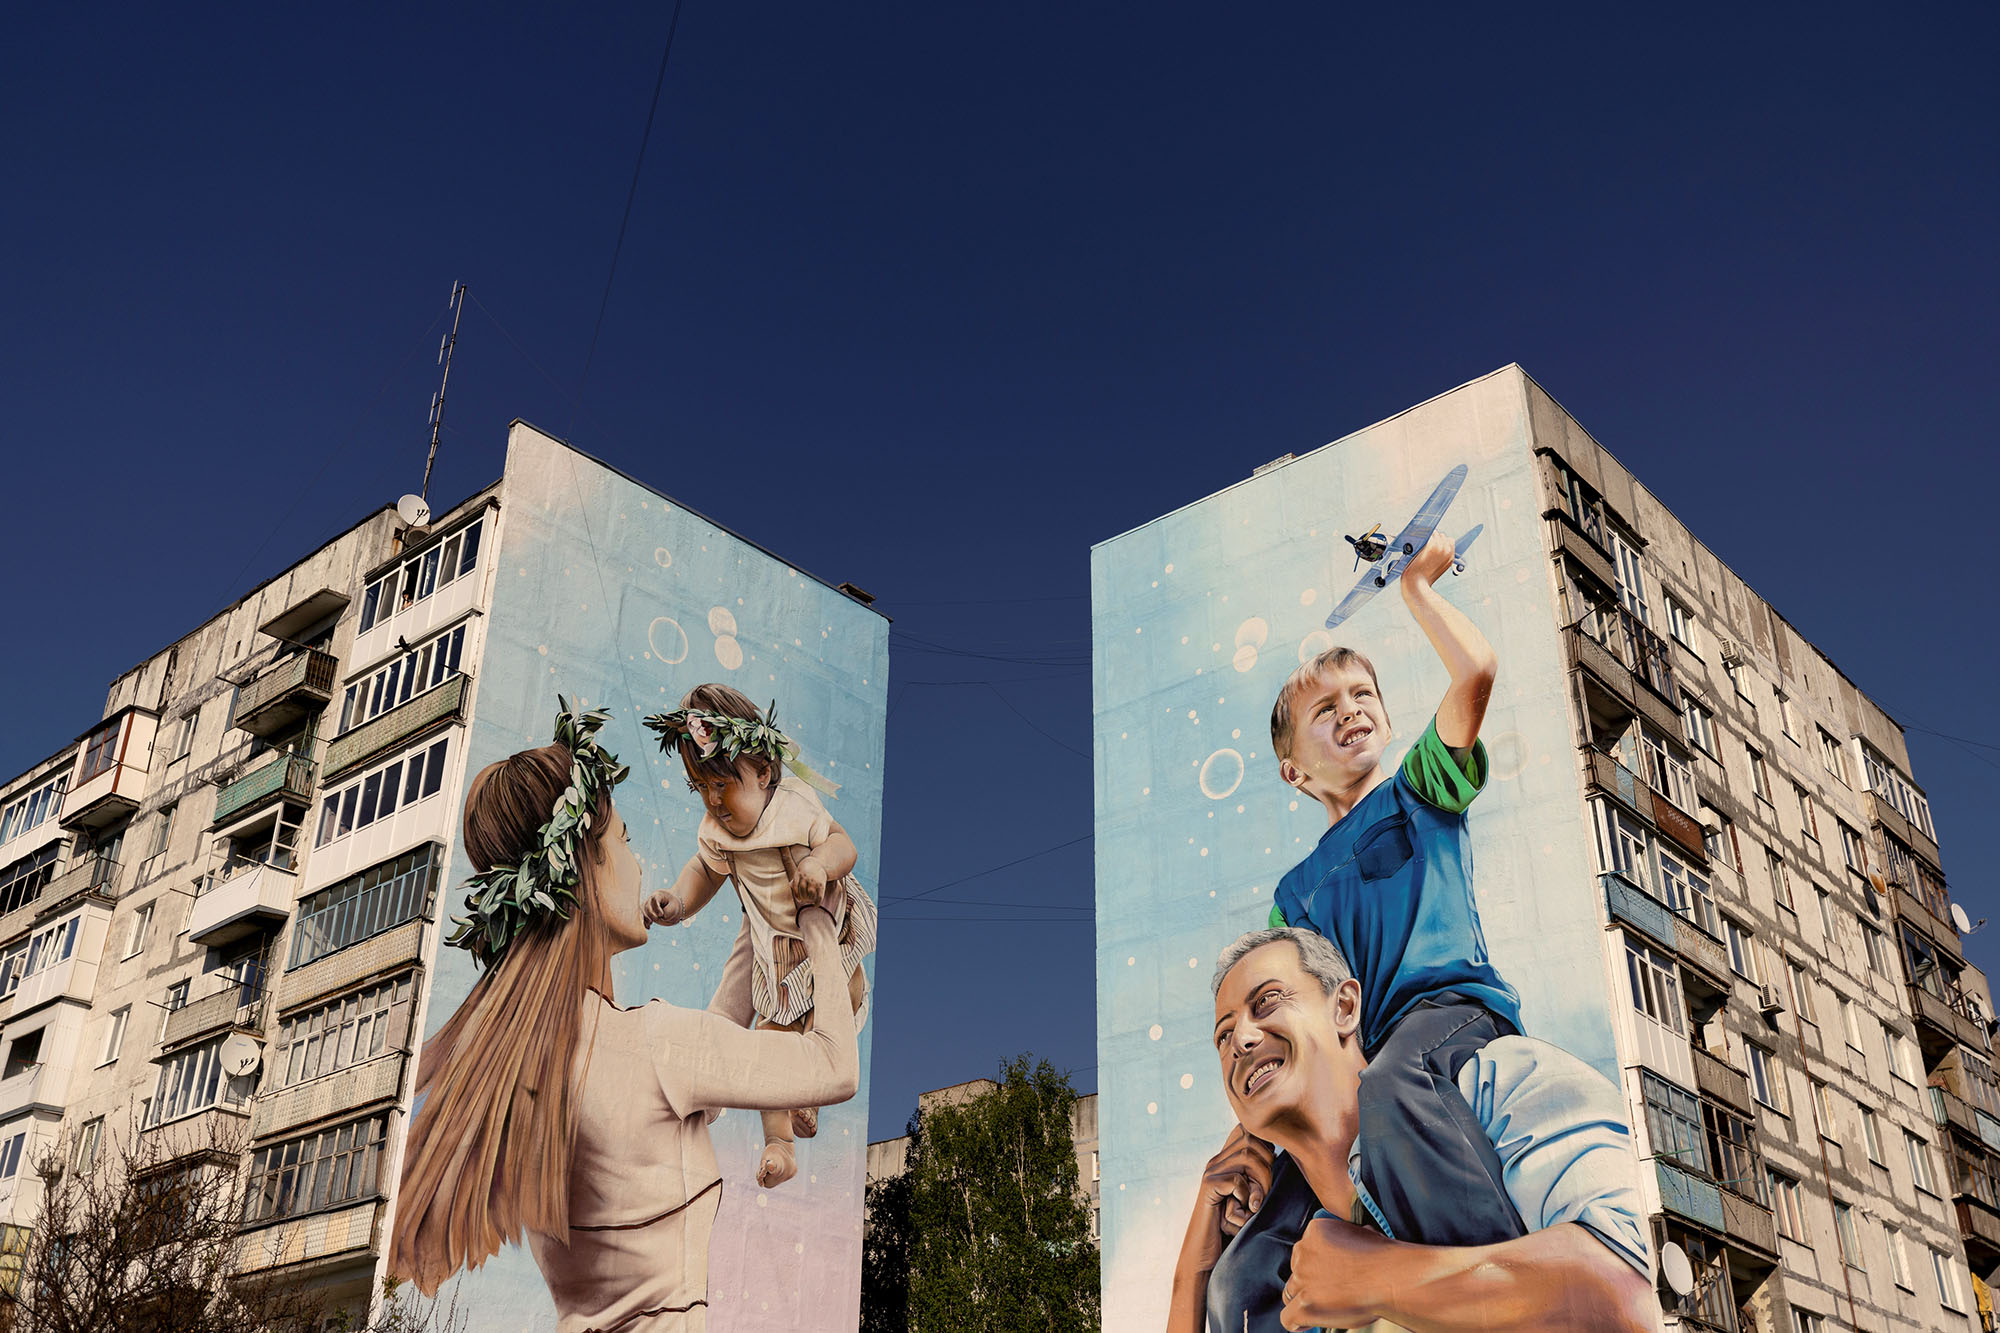 Murals are painted on the side of apartments blocks, in Bakhmut, Ukraine, on May 6, 2022.